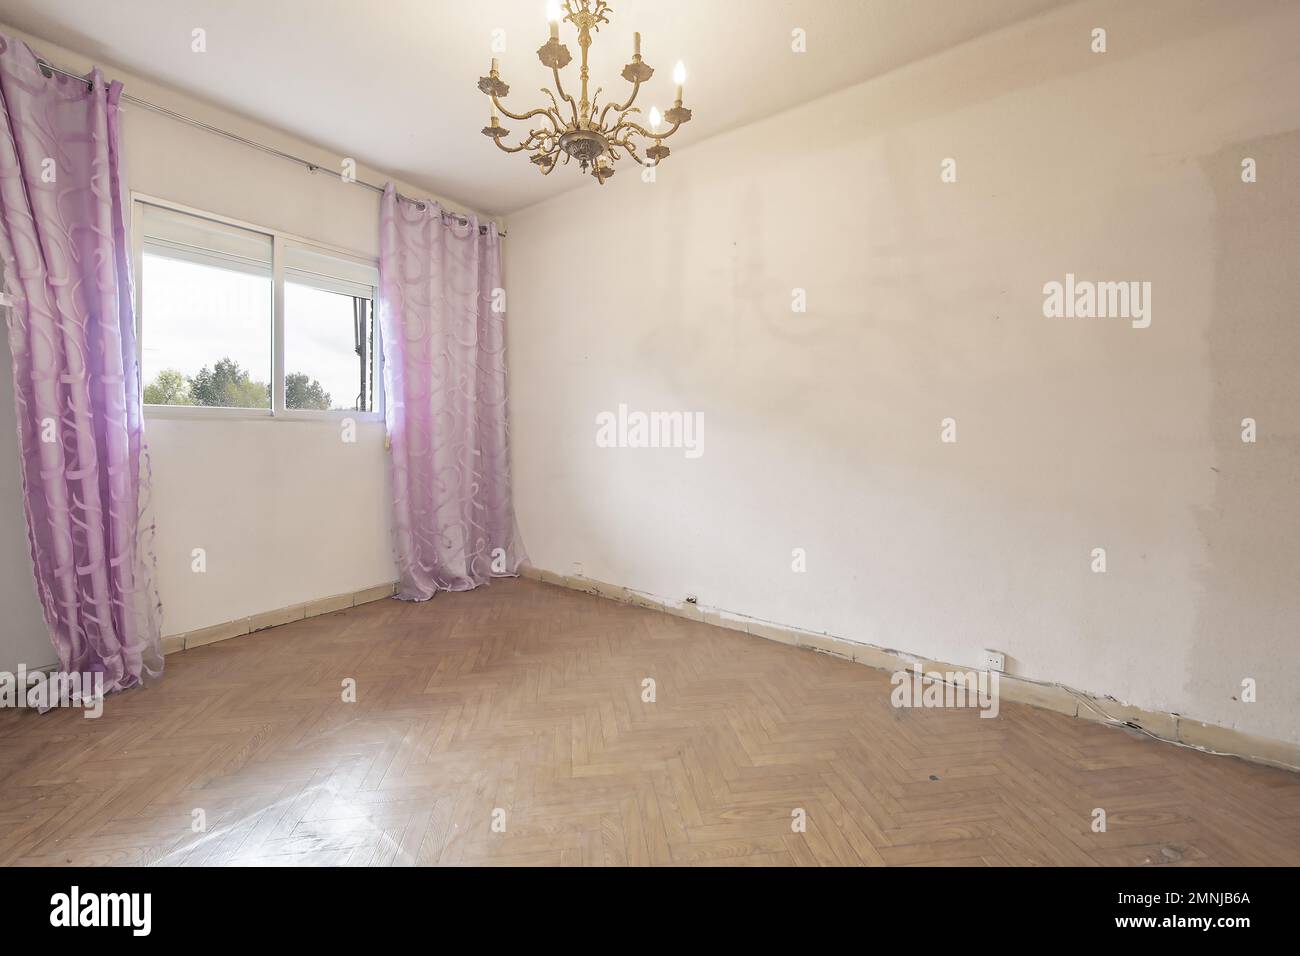 Empty room with white painted walls, wood-look sintasol floor and white aluminum windows with pink curtains Stock Photo